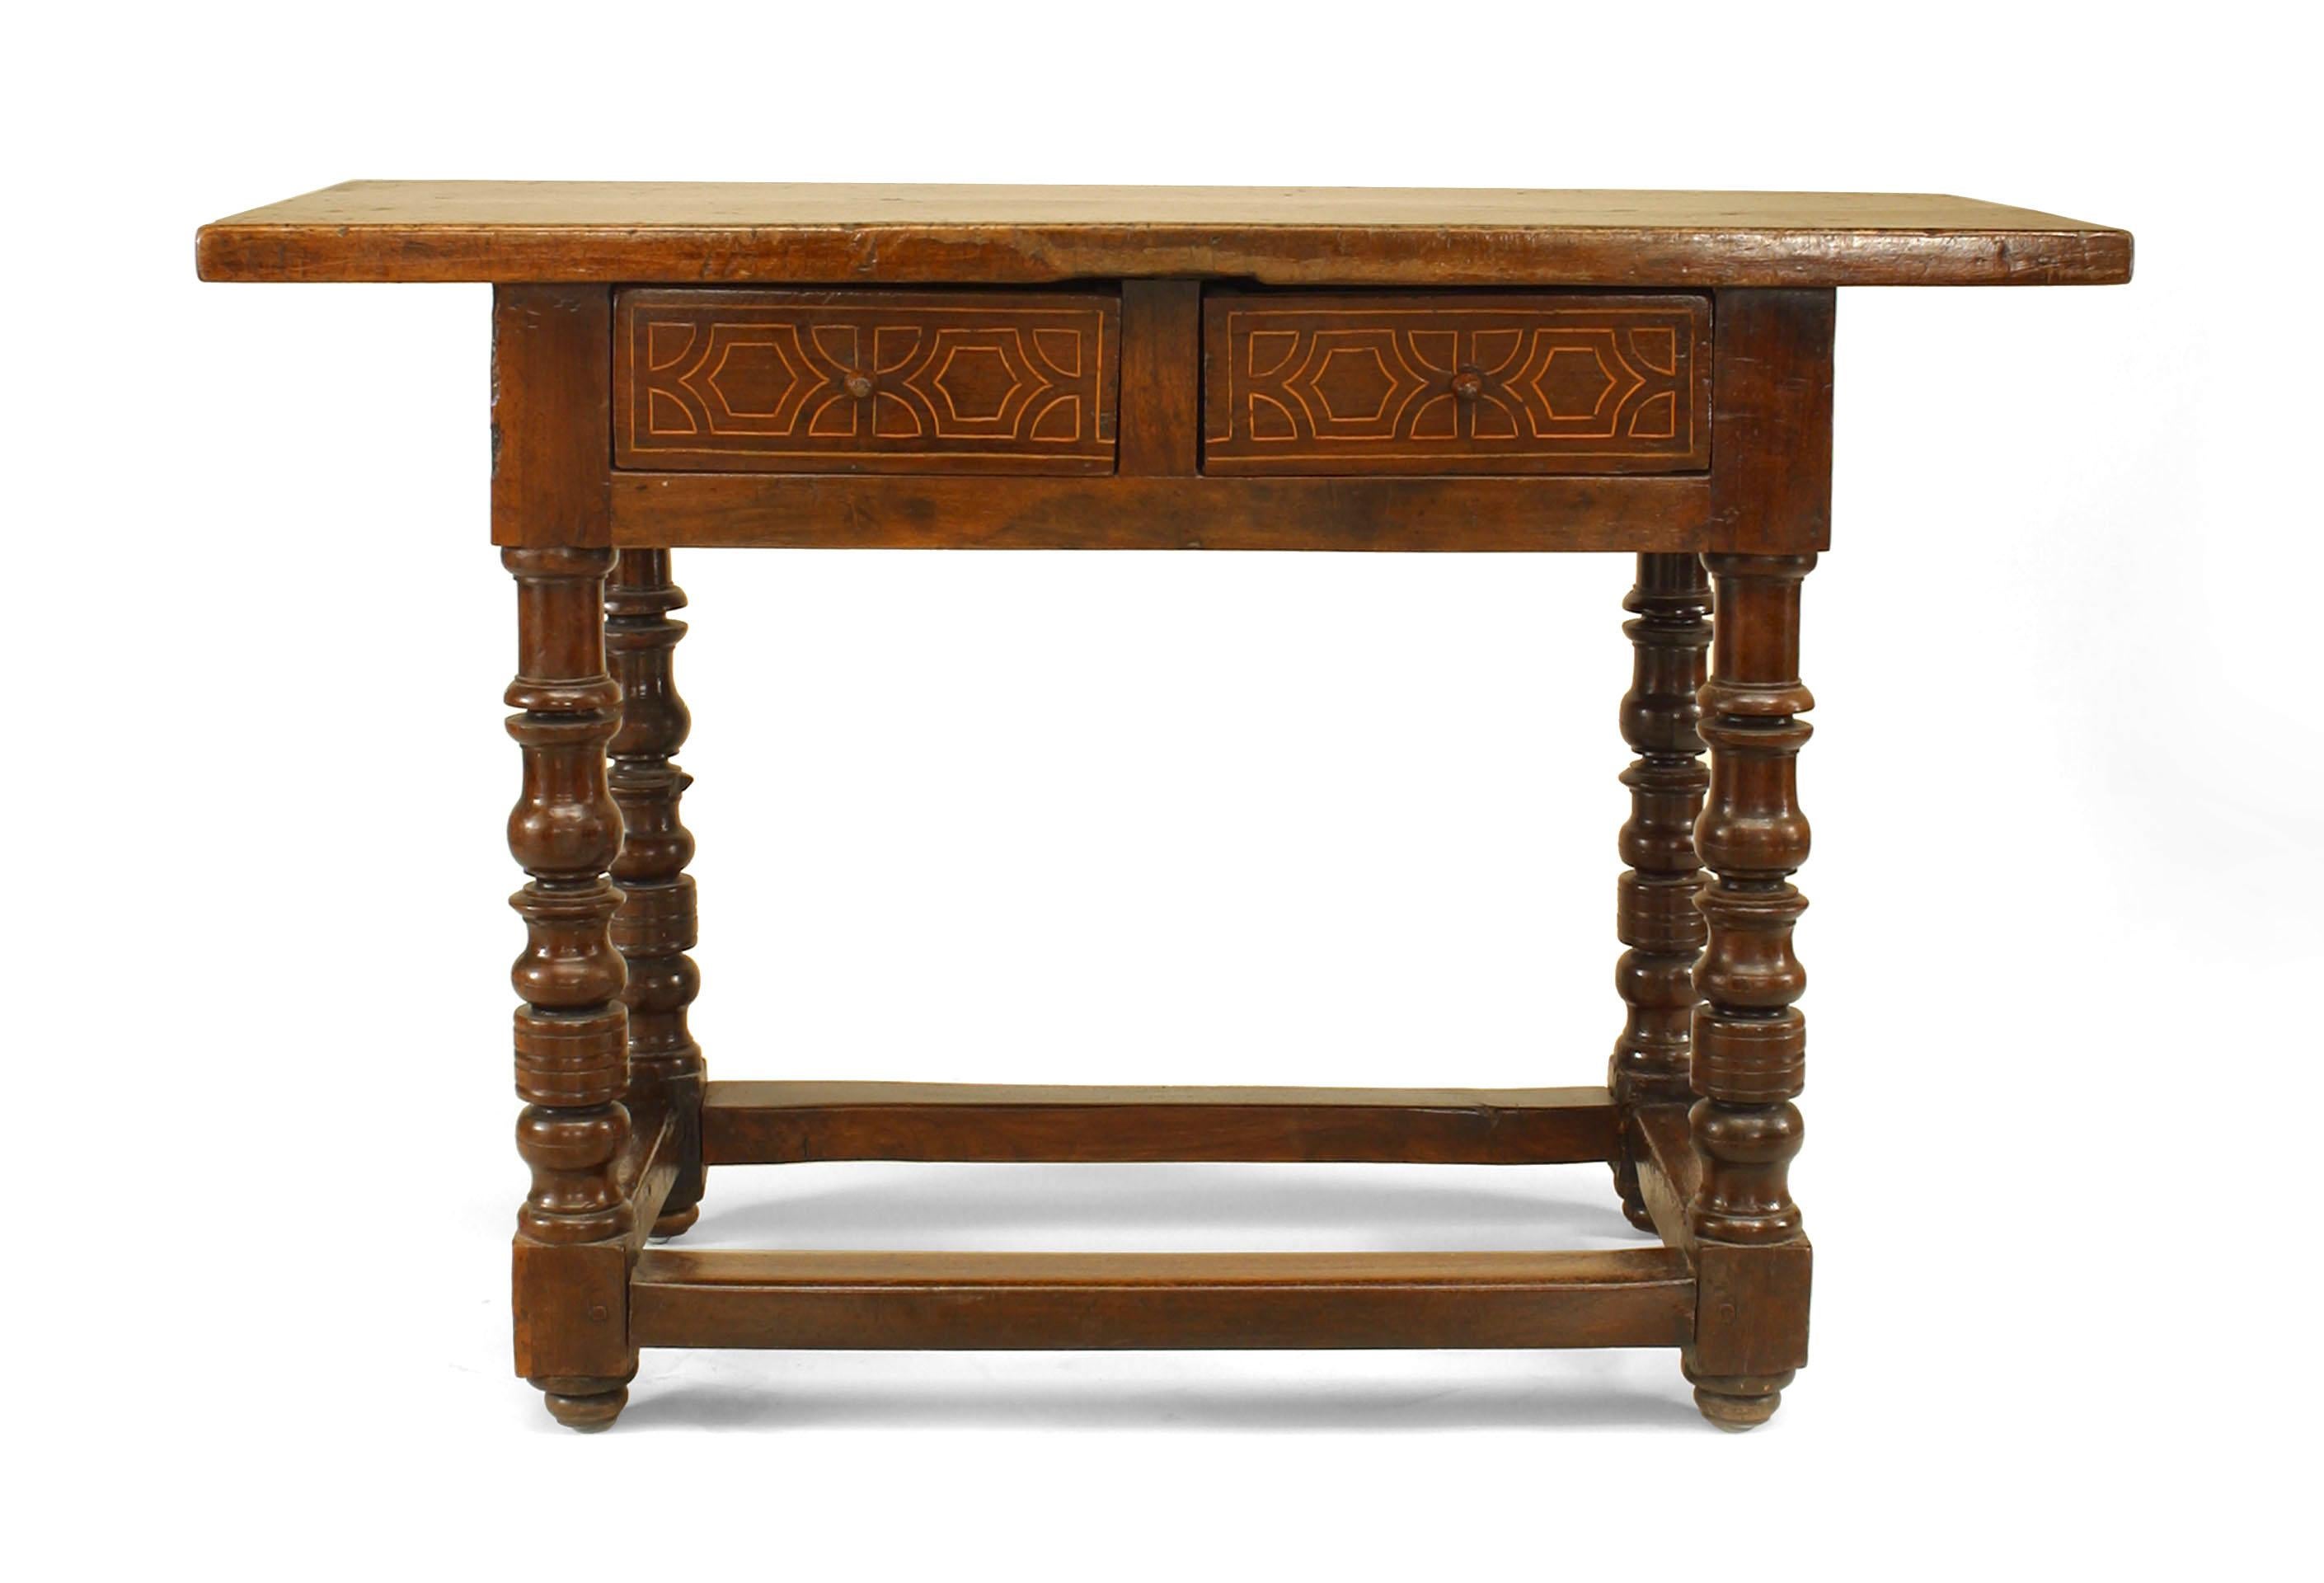 English Renaissance-style (17/18th Century) oak console table with 2 banded inlaid drawers and supported on turned legs with a box form stretcher.
